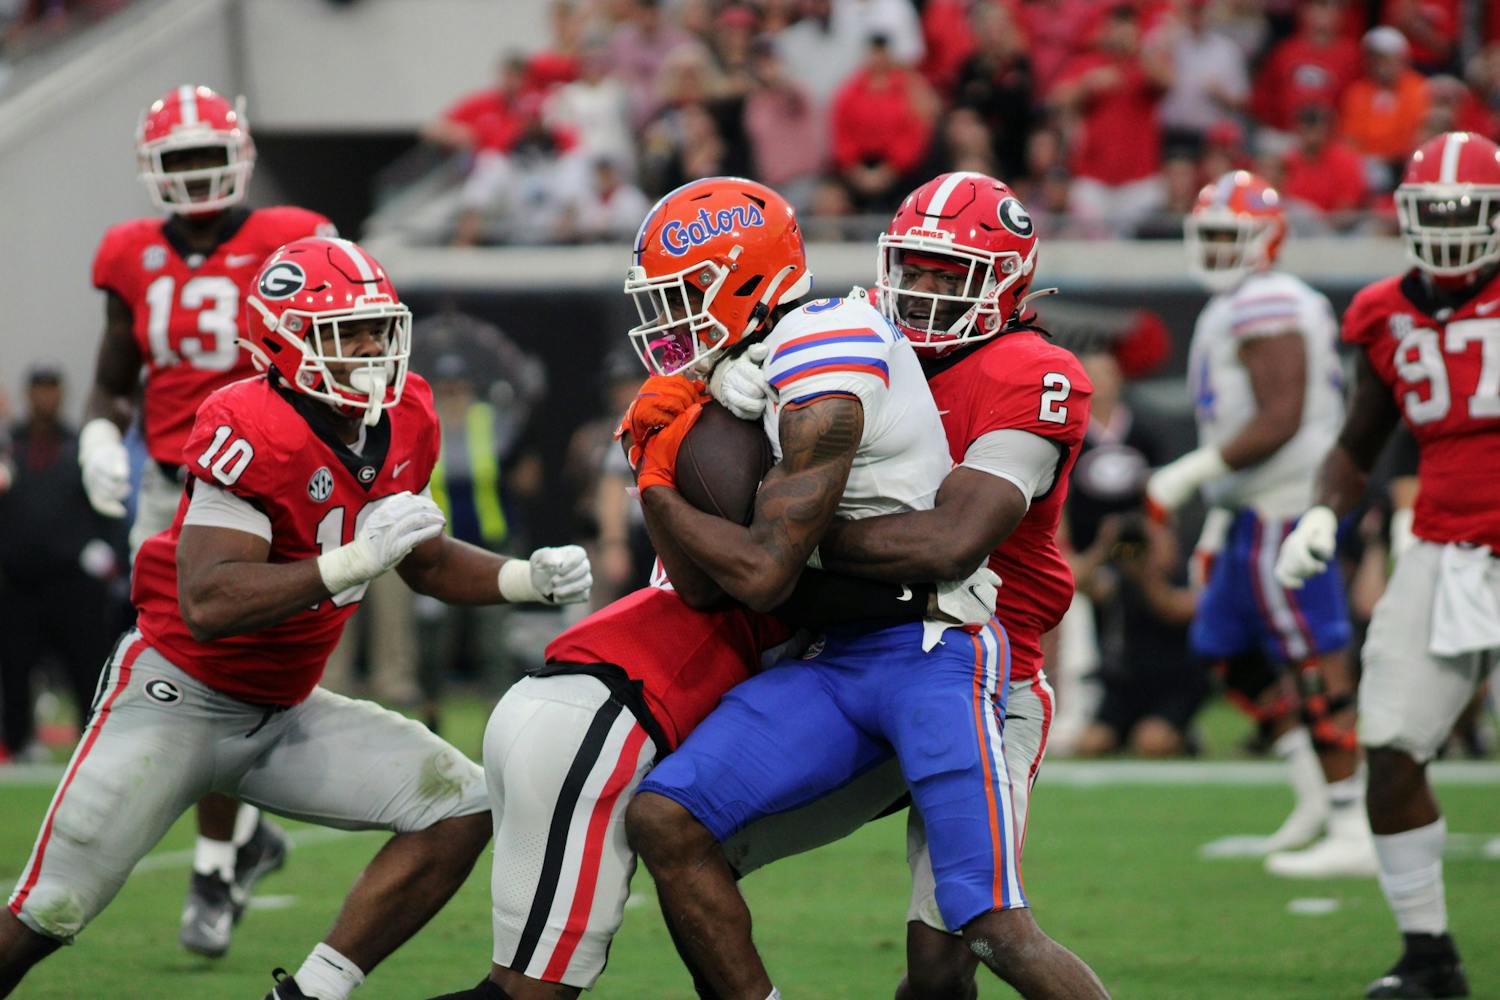 UGA, the No. 1 team in the country and reigning national champion, proved to be too much for Florida Saturday en route to a 42-20 win. Georgia’s best players like Bowers and junior defensive lineman Jalen Carter dominated as head coach Kirby Smart’s team looked the part of the country’s top team.